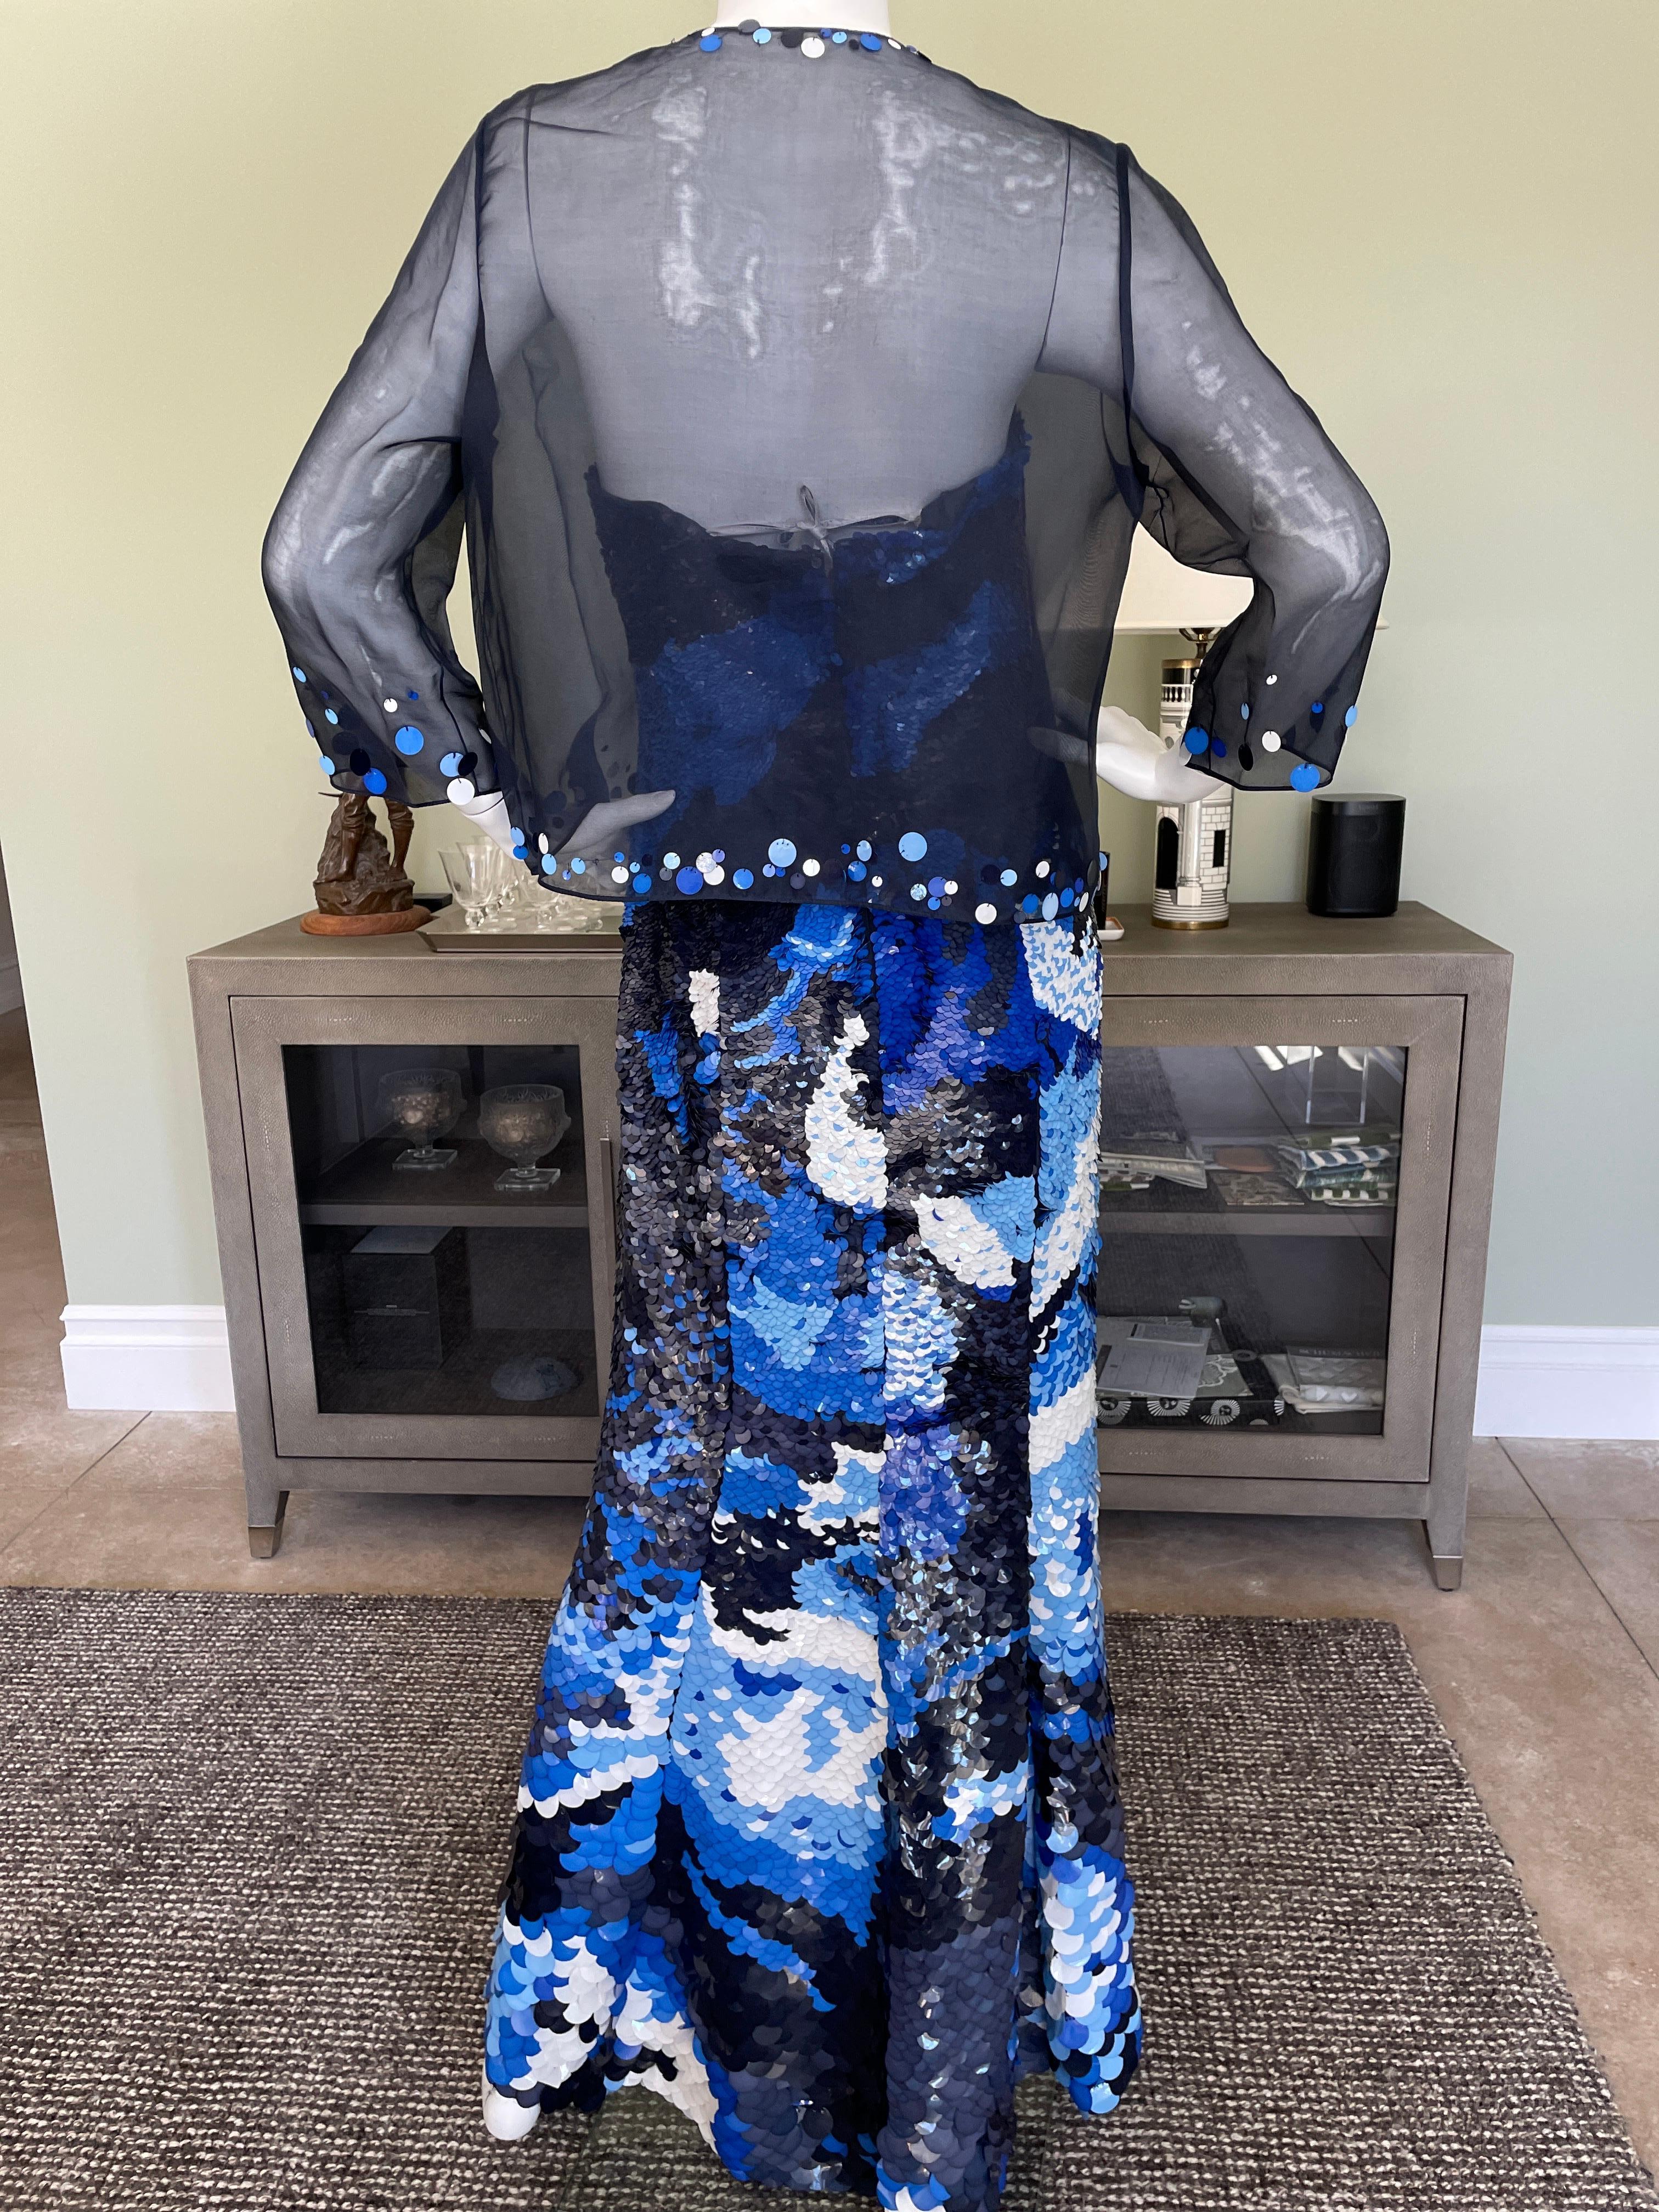 Oscar de la Renta Vintage Fish Scale Sequin Corseted Evening Dress with Jacket In Excellent Condition For Sale In Cloverdale, CA